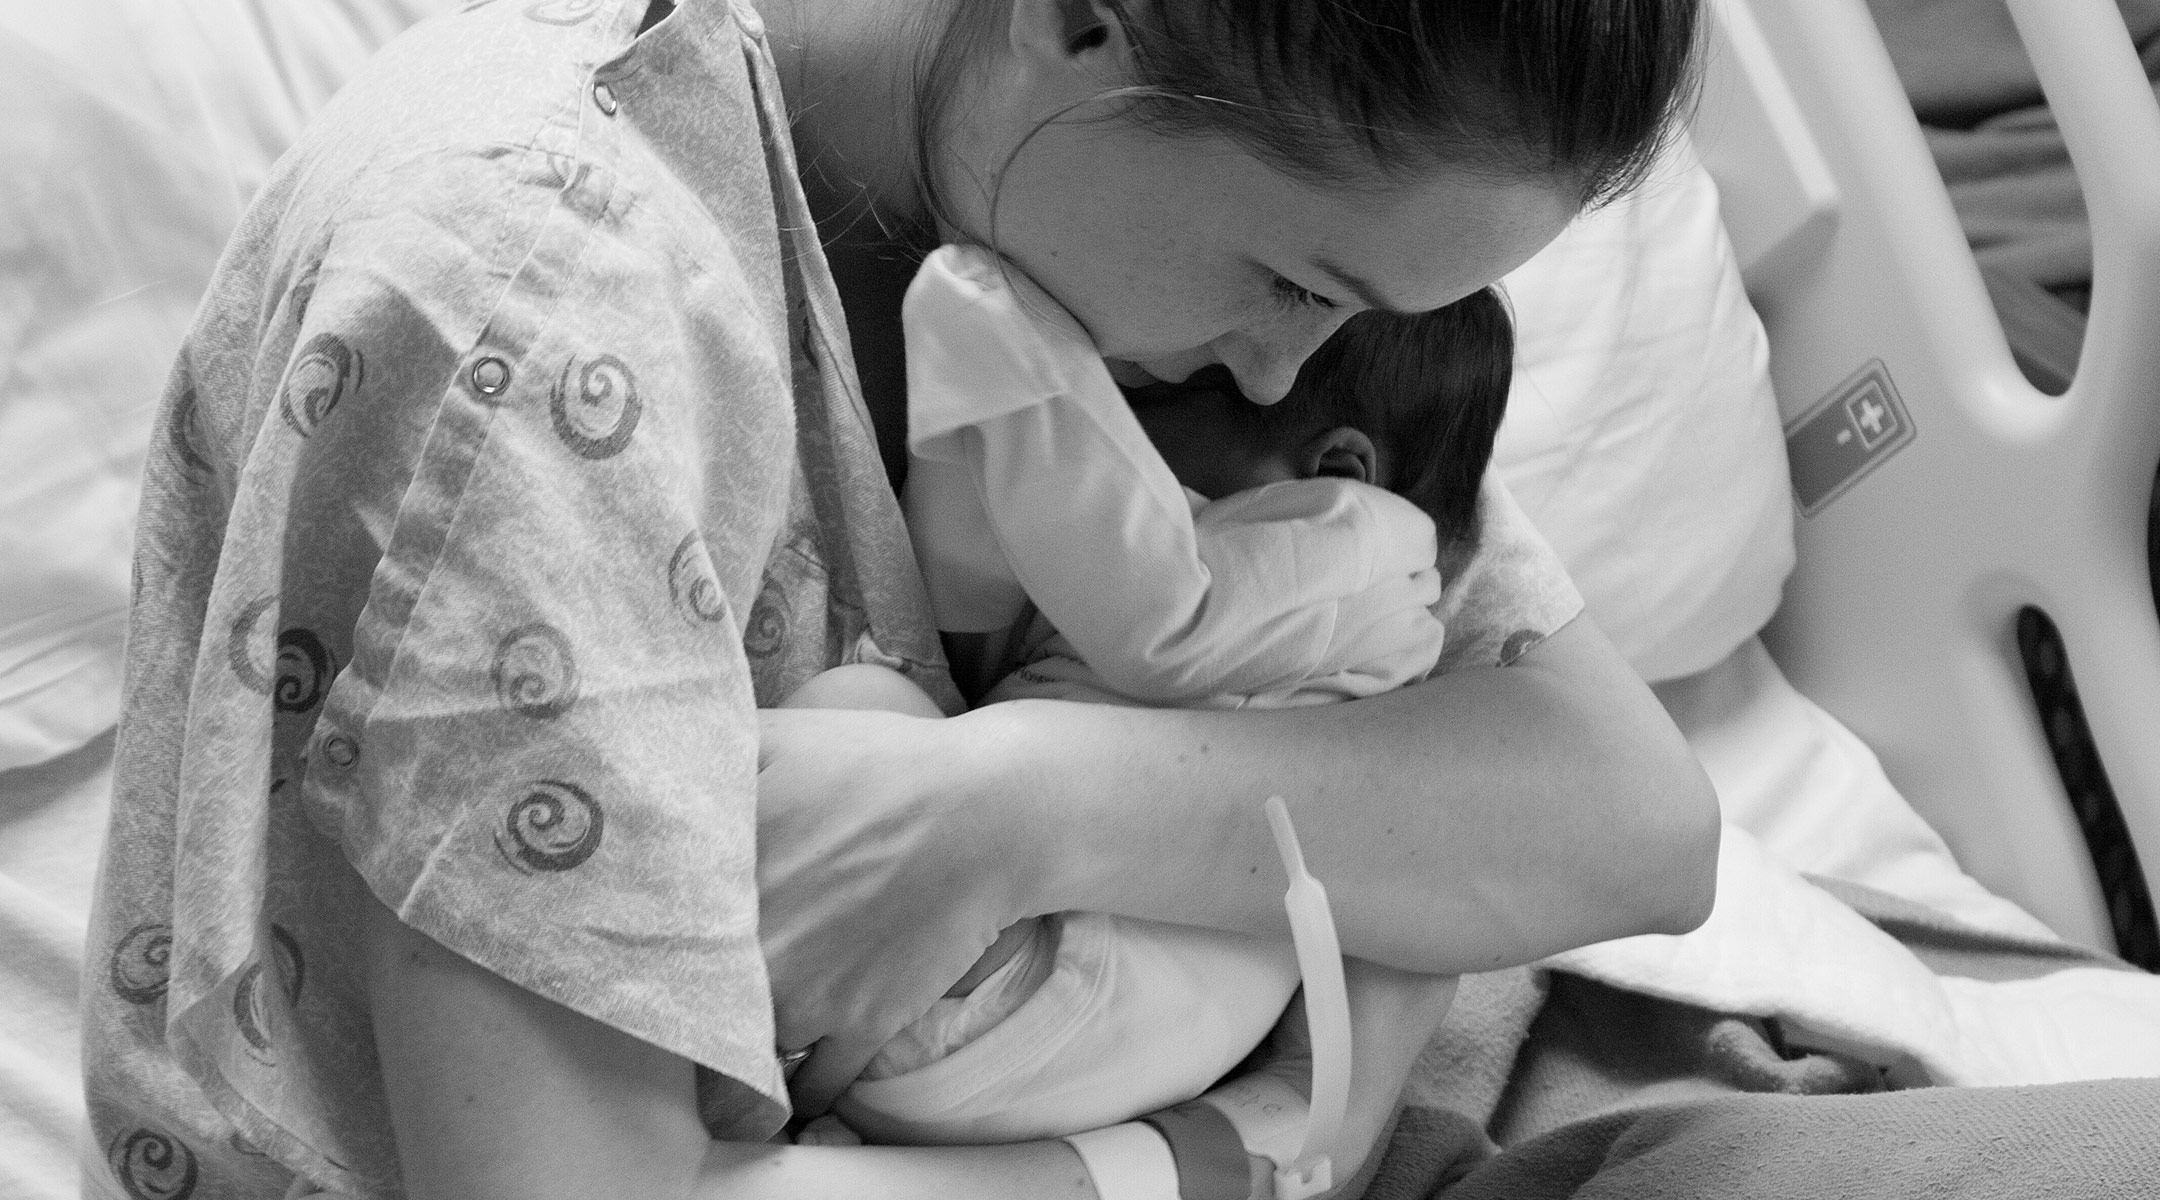 woman holds her newborn baby tightly after just giving birth